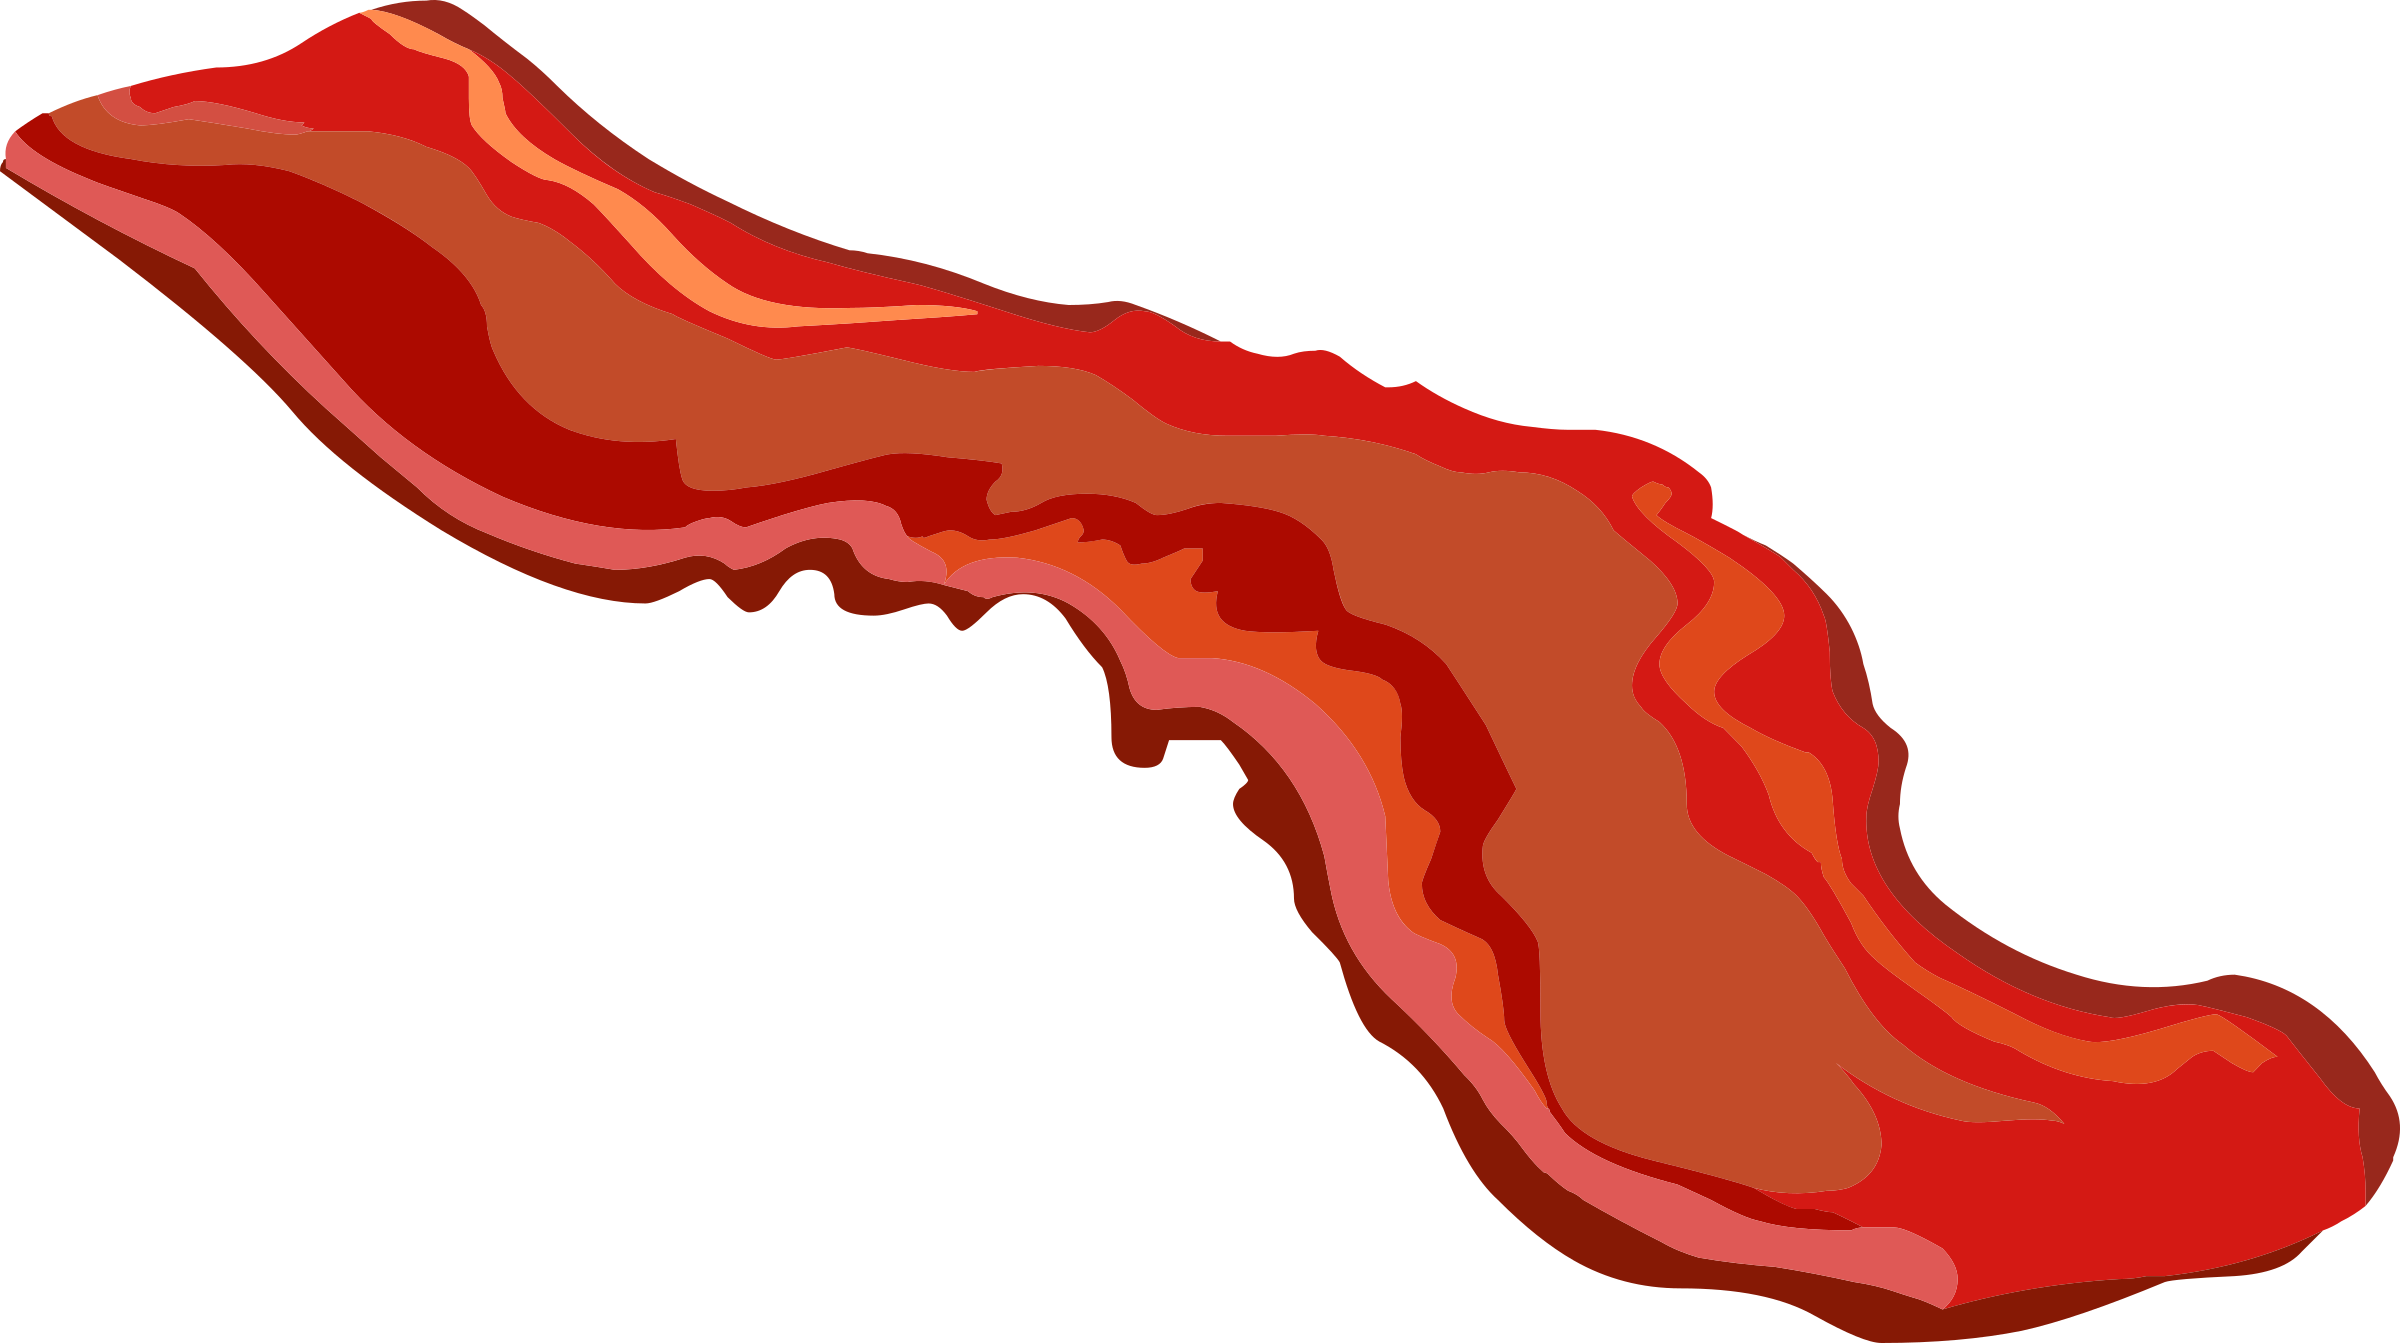 Bacon Free Download Png - Bacon, Transparent background PNG HD thumbnail